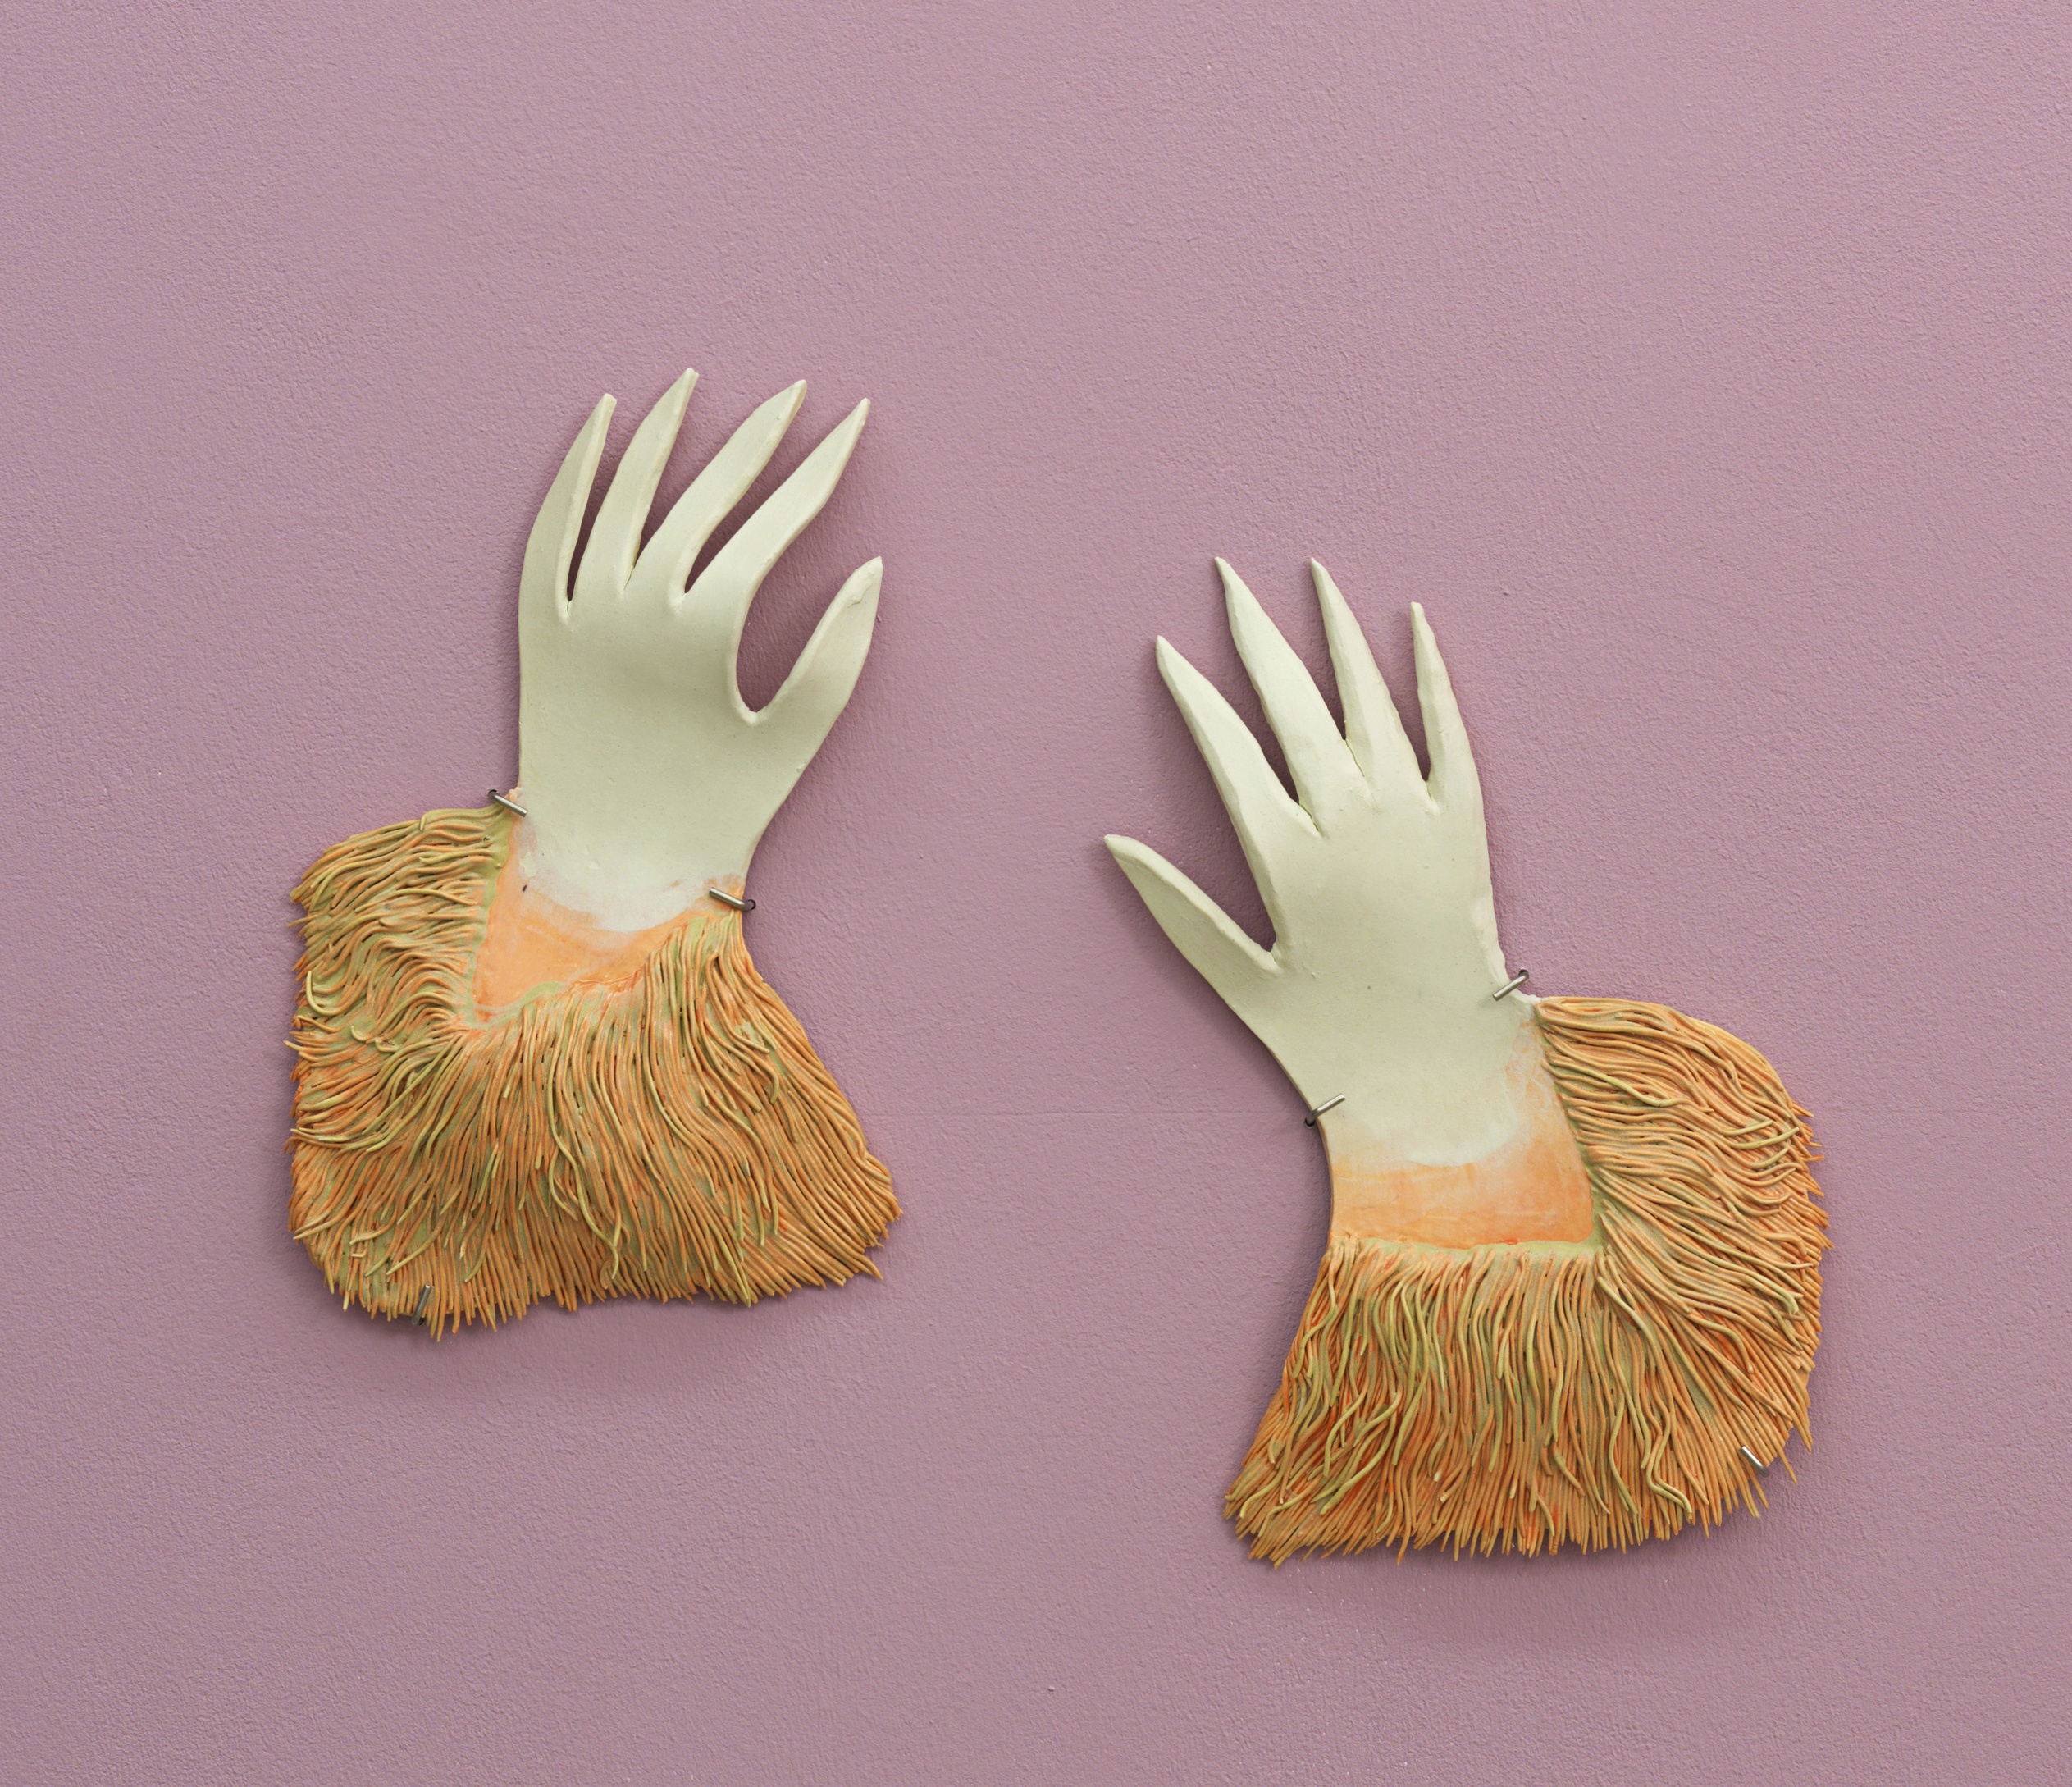 Many a girl has lost her glove, 2019. From A History of Scissors at Soy Capitan